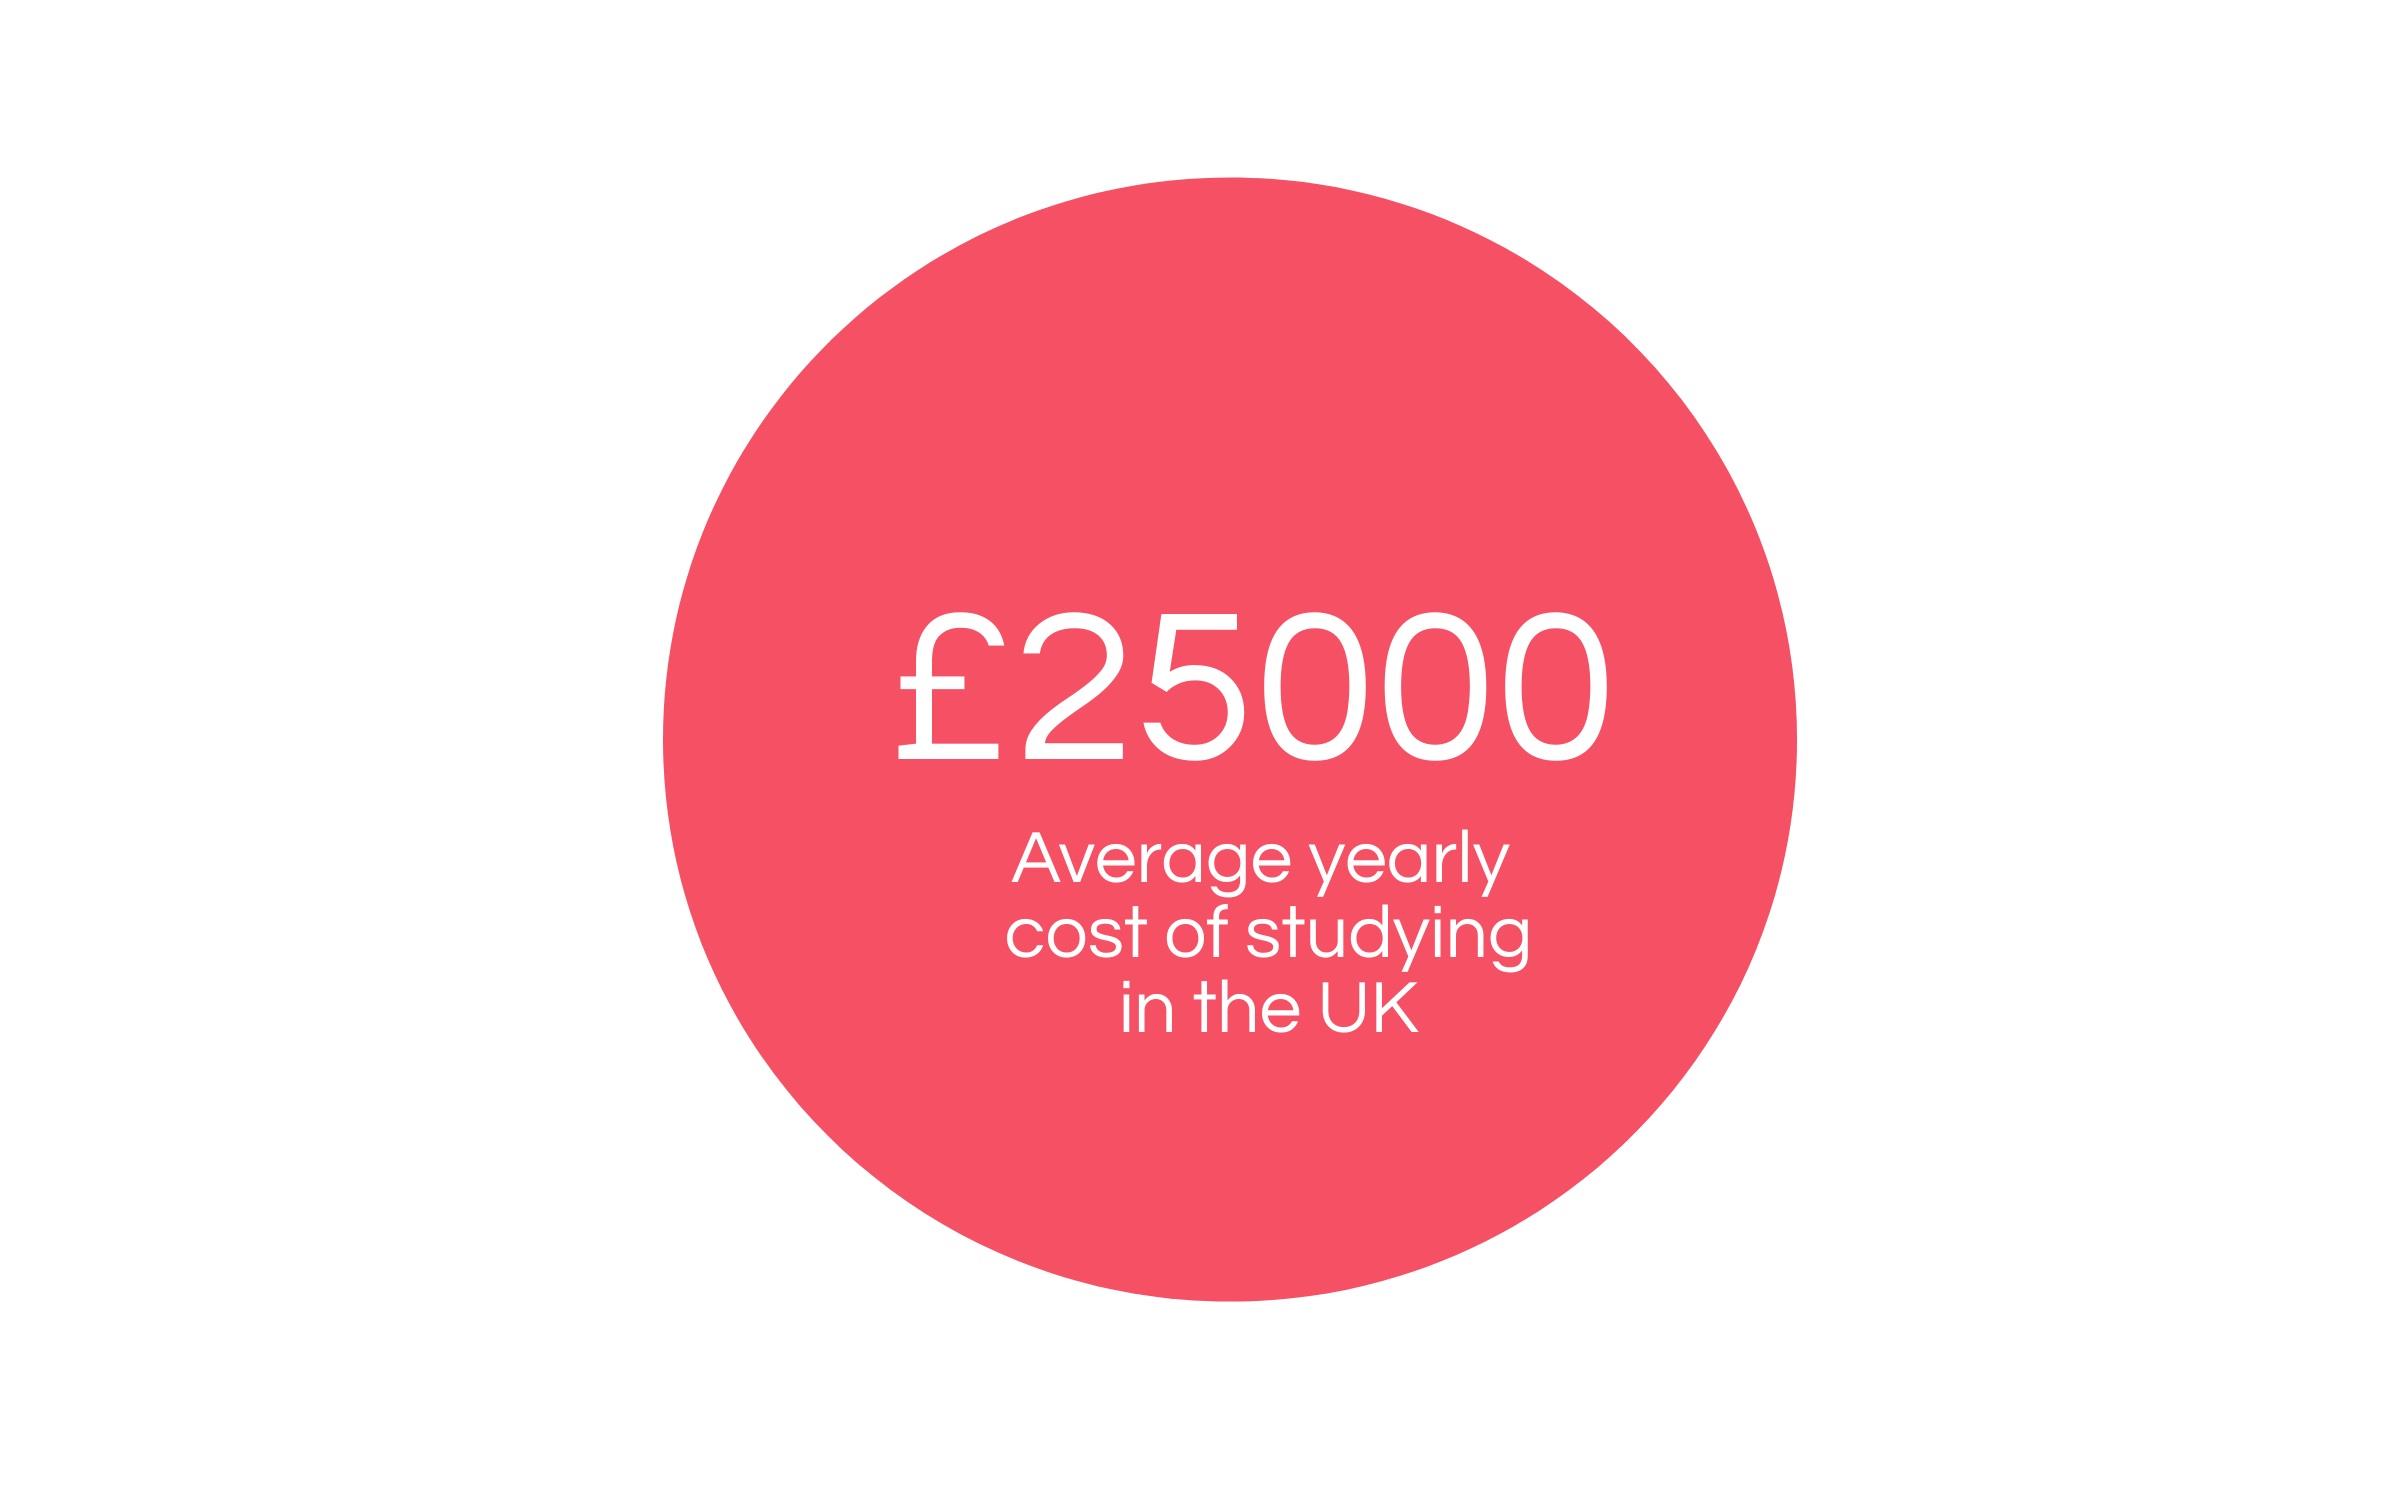 Tuition fees in the UK